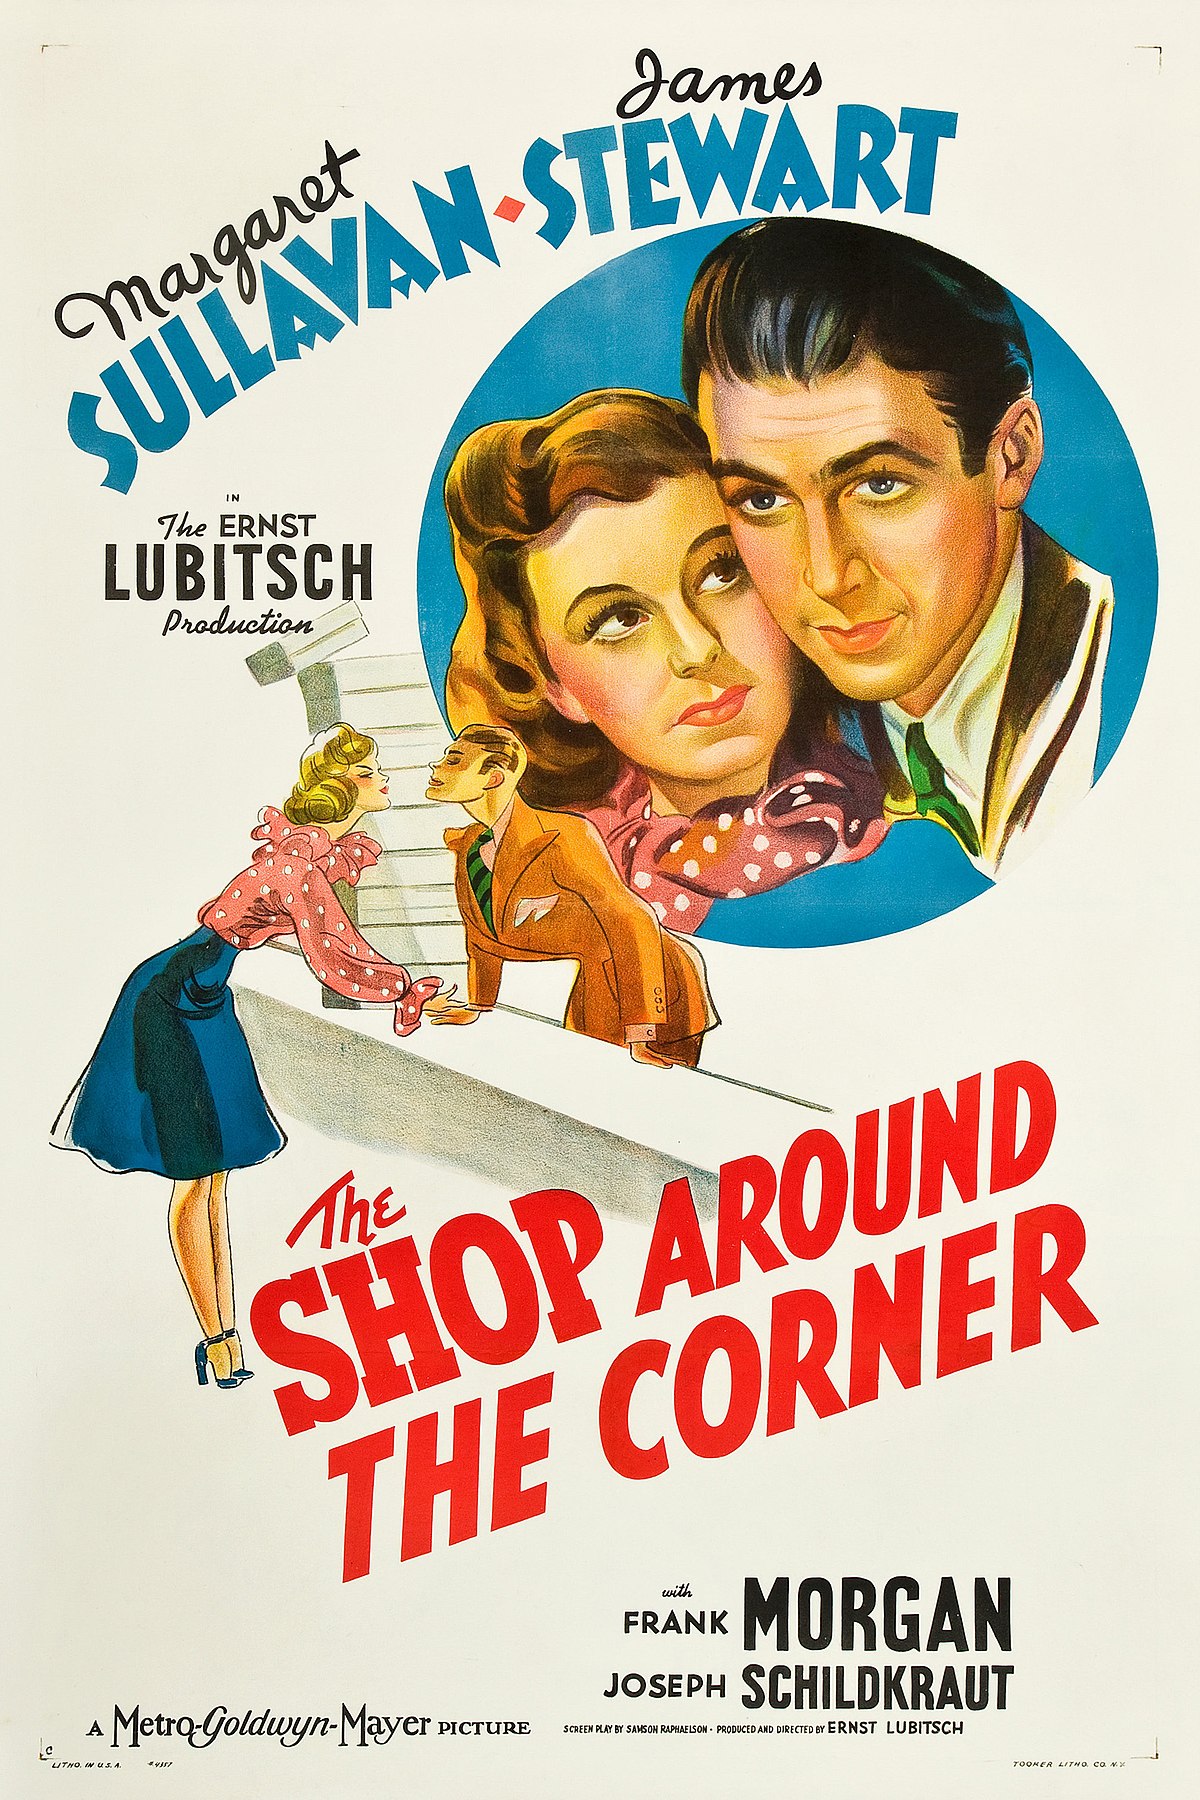 https://upload.wikimedia.org/wikipedia/commons/thumb/7/70/The_Shop_Around_the_Corner_%281940_poster_-_Style_C%29.jpg/1200px-The_Shop_Around_the_Corner_%281940_poster_-_Style_C%29.jpg